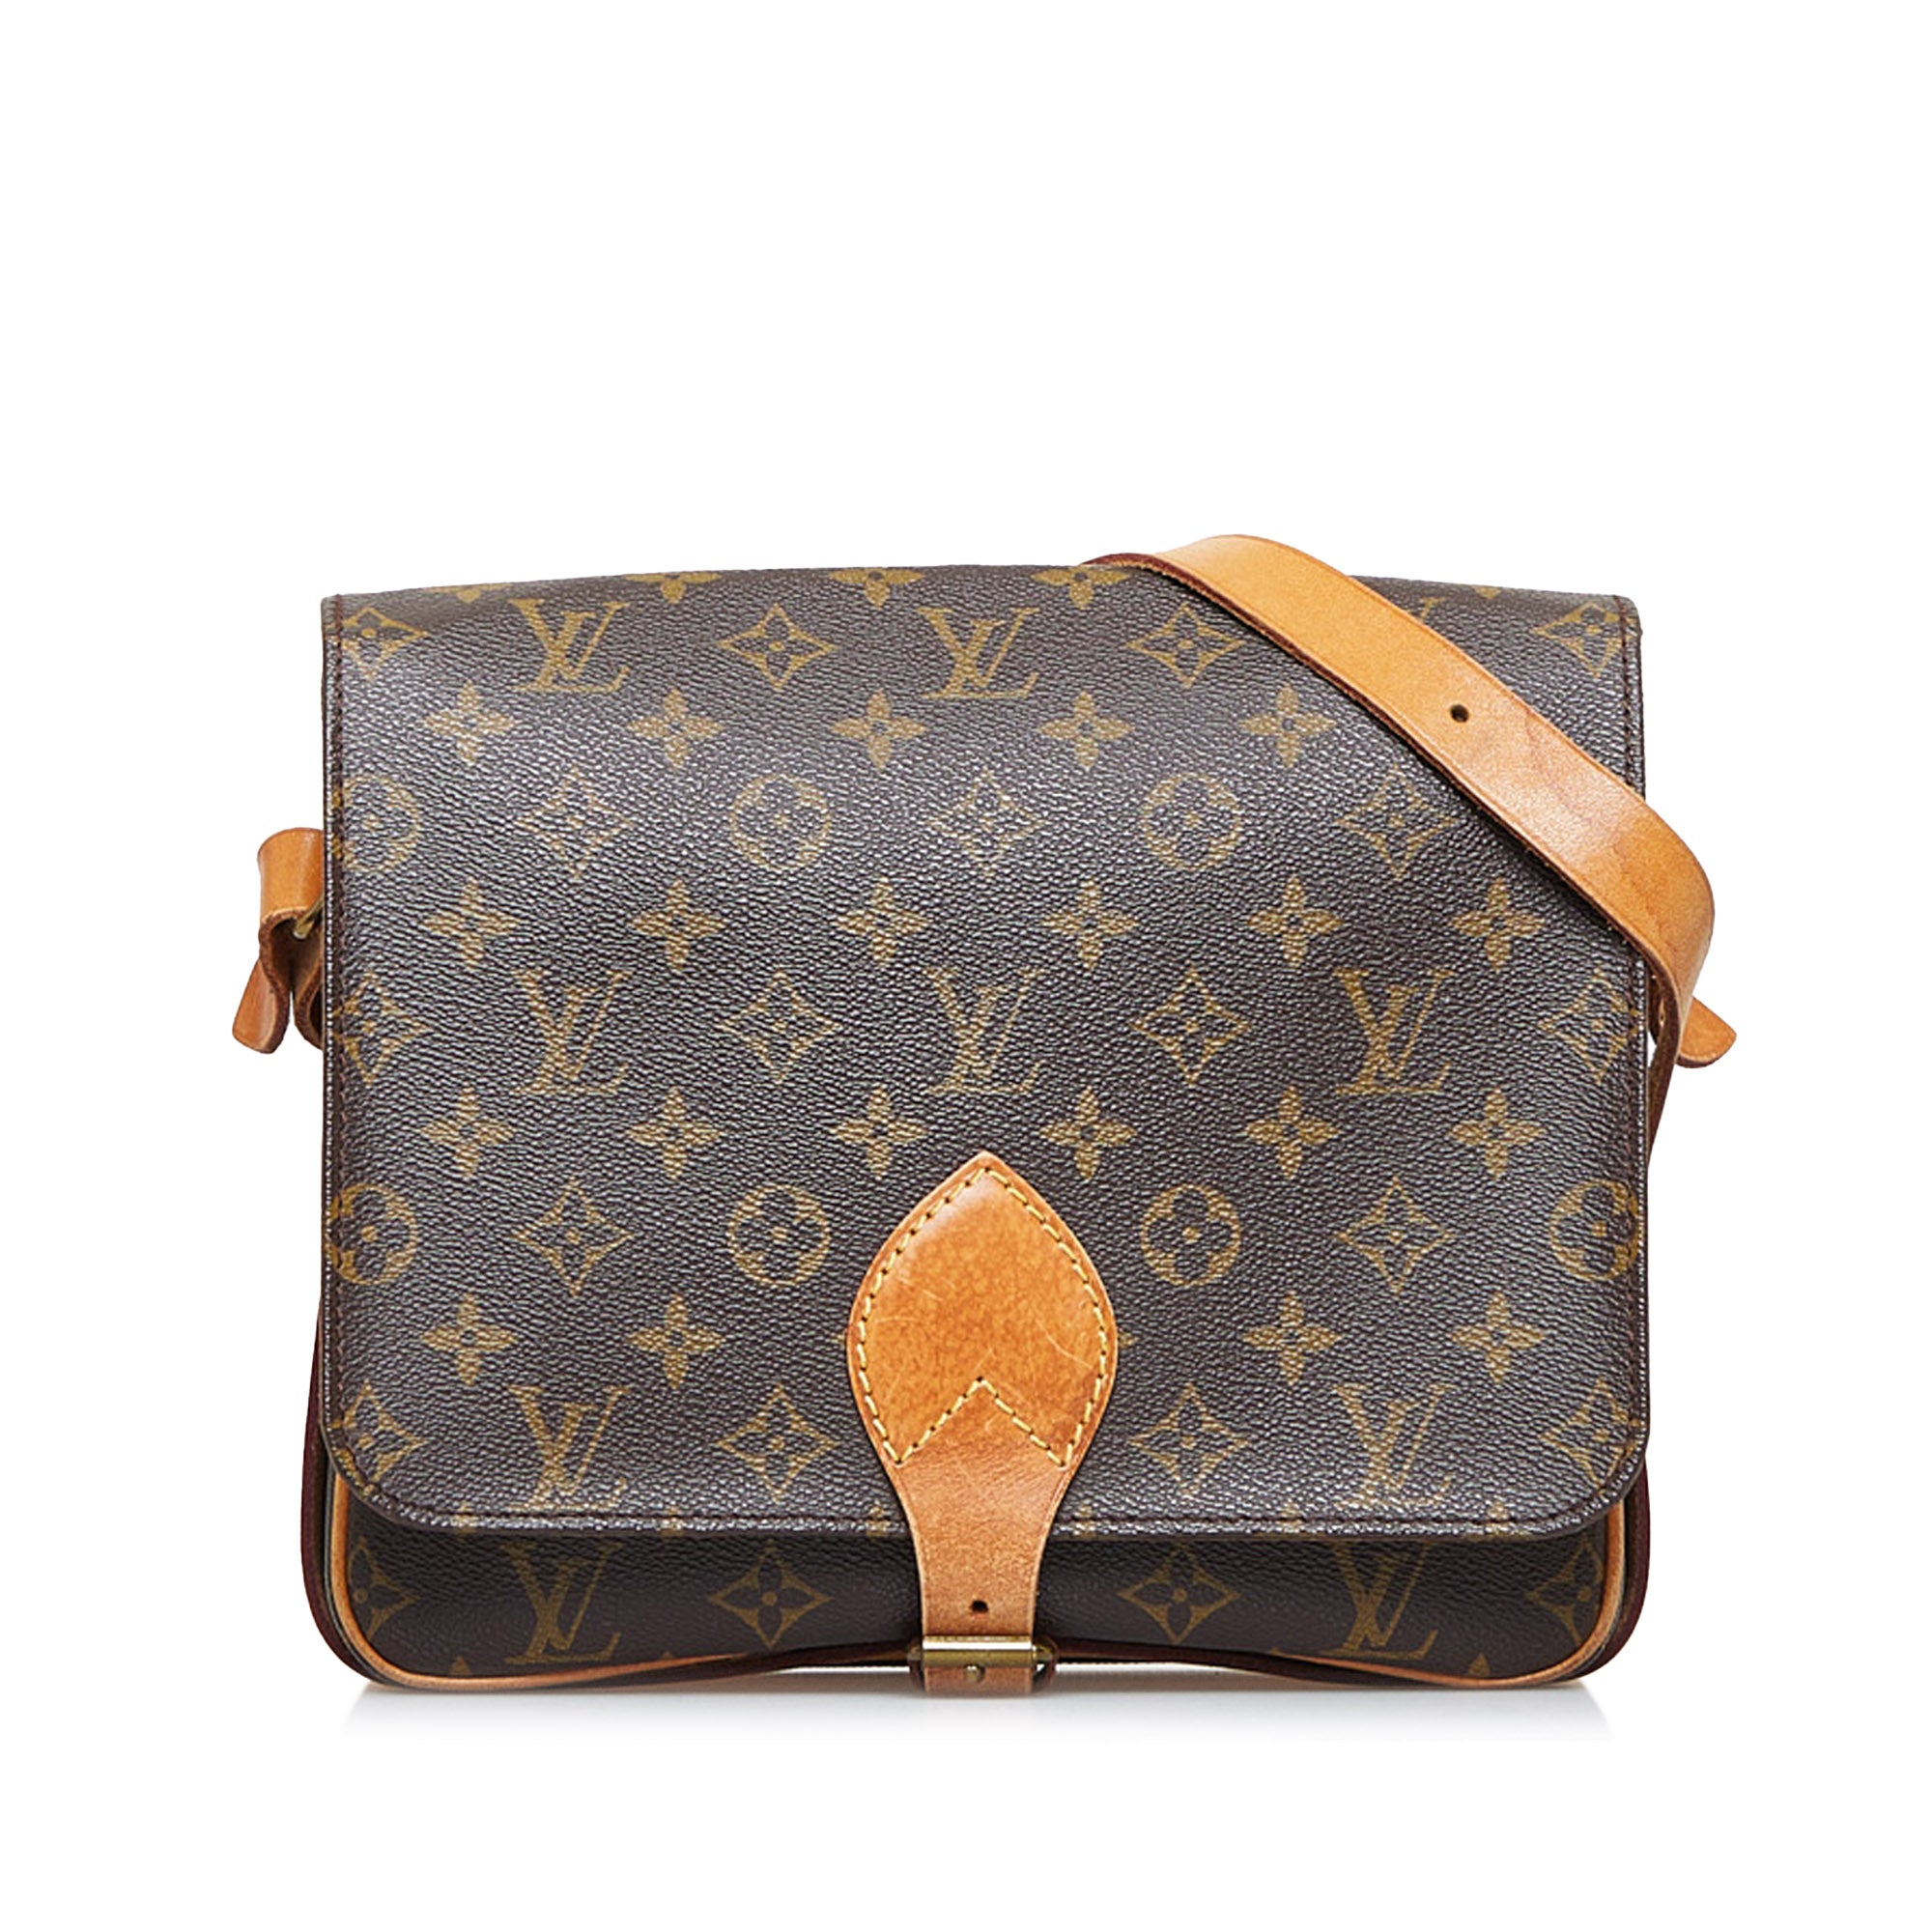 BETTER THAN THE NEVERFULL  Louis Vuitton Grand Cabas Review